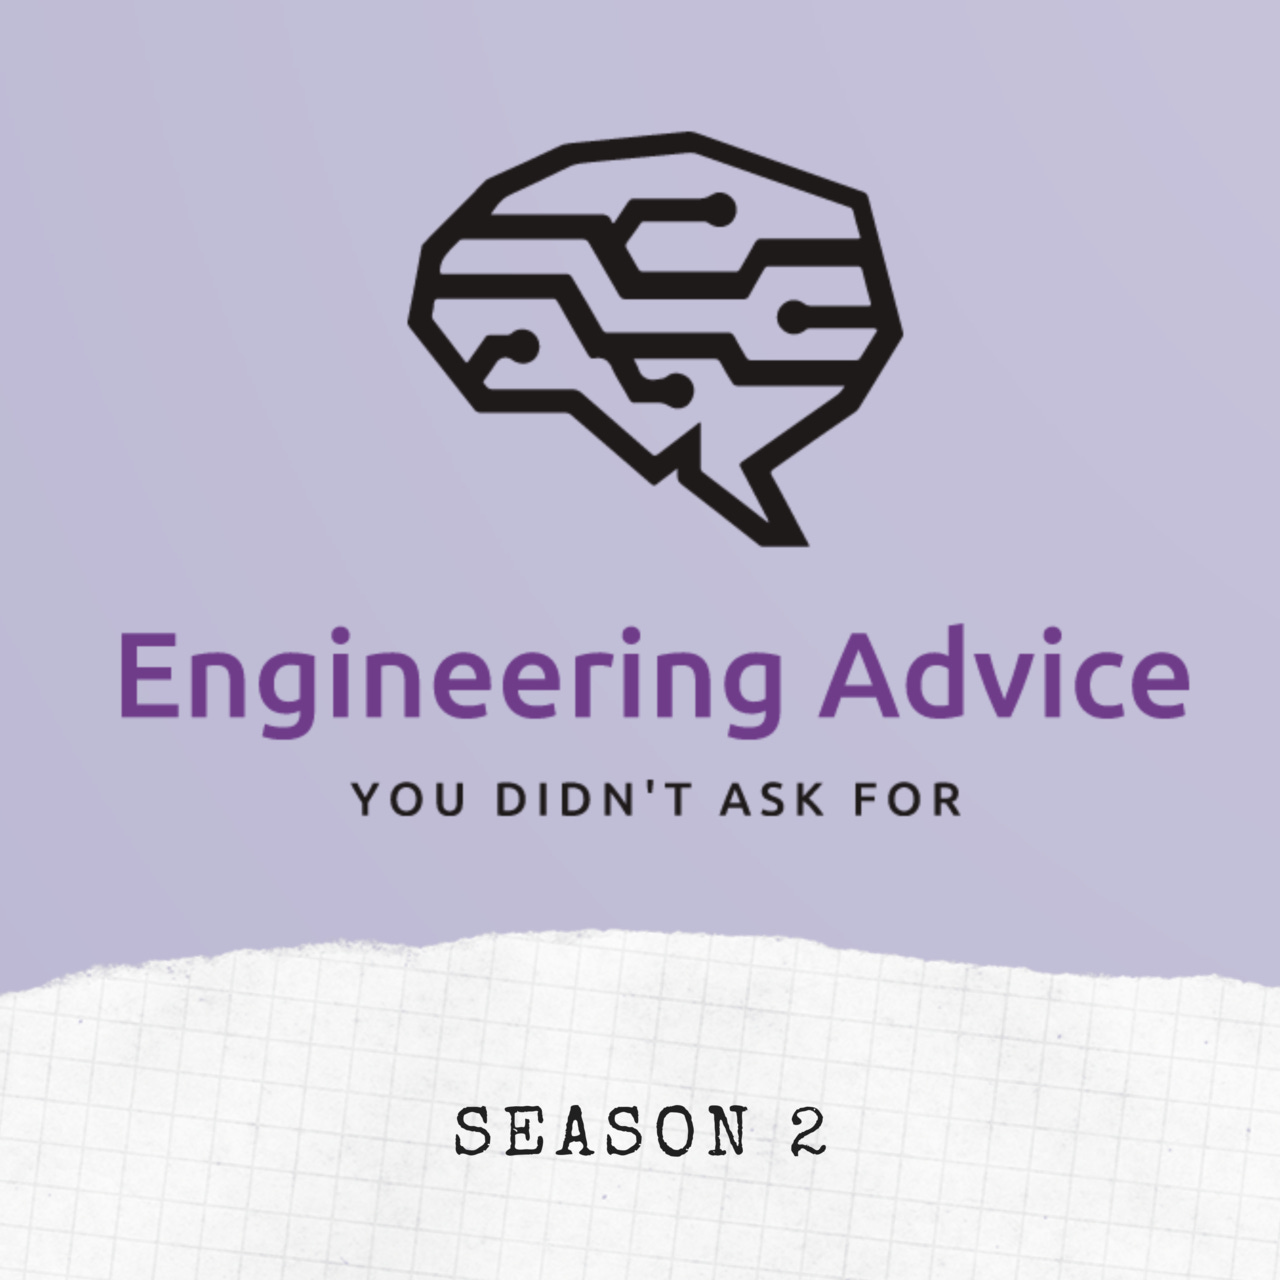 Engineering Advice You Didn't Ask For